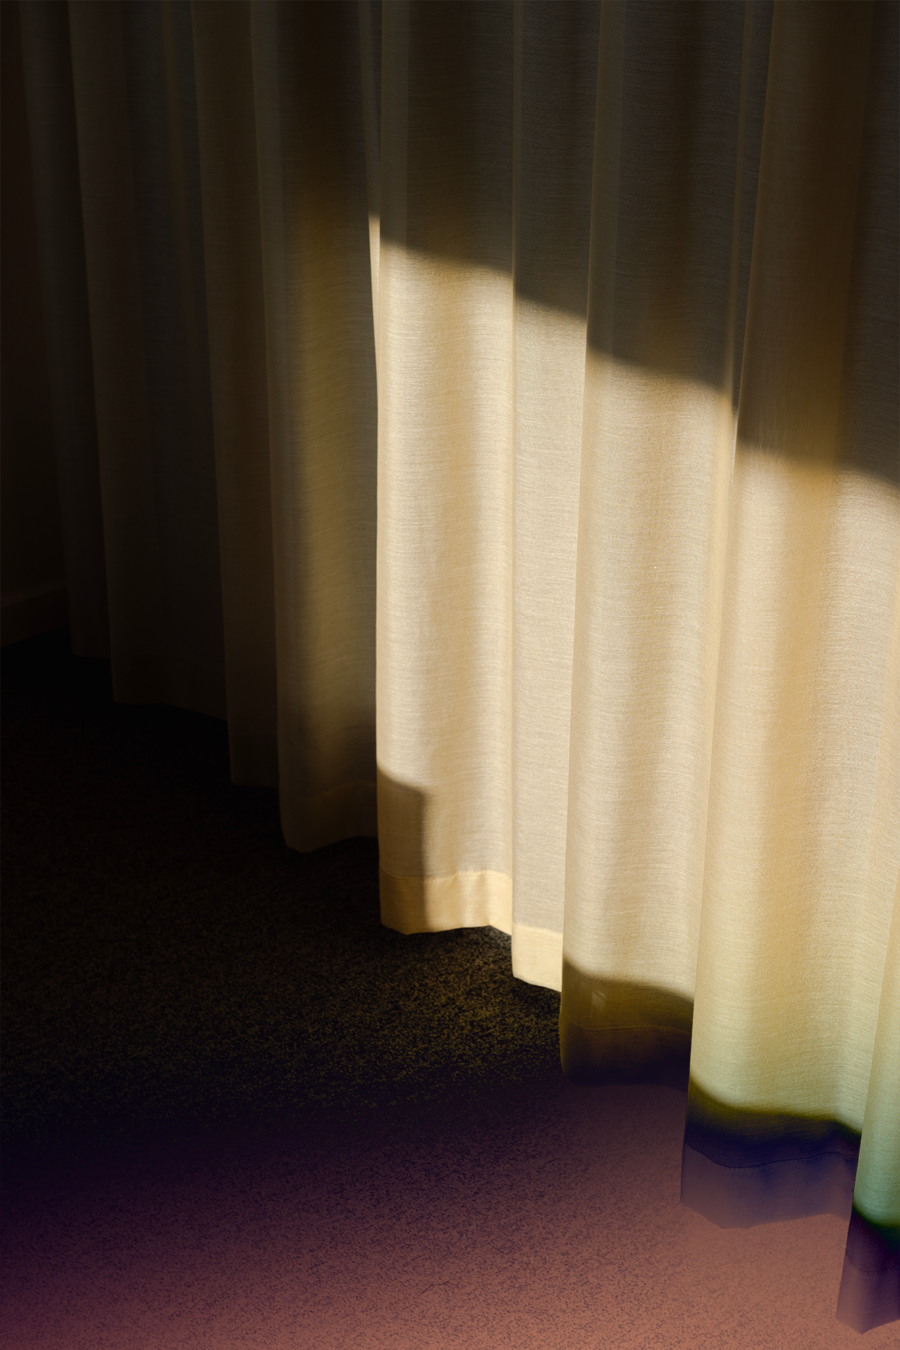 Cream-coloured curtains with sunlight shining through them.